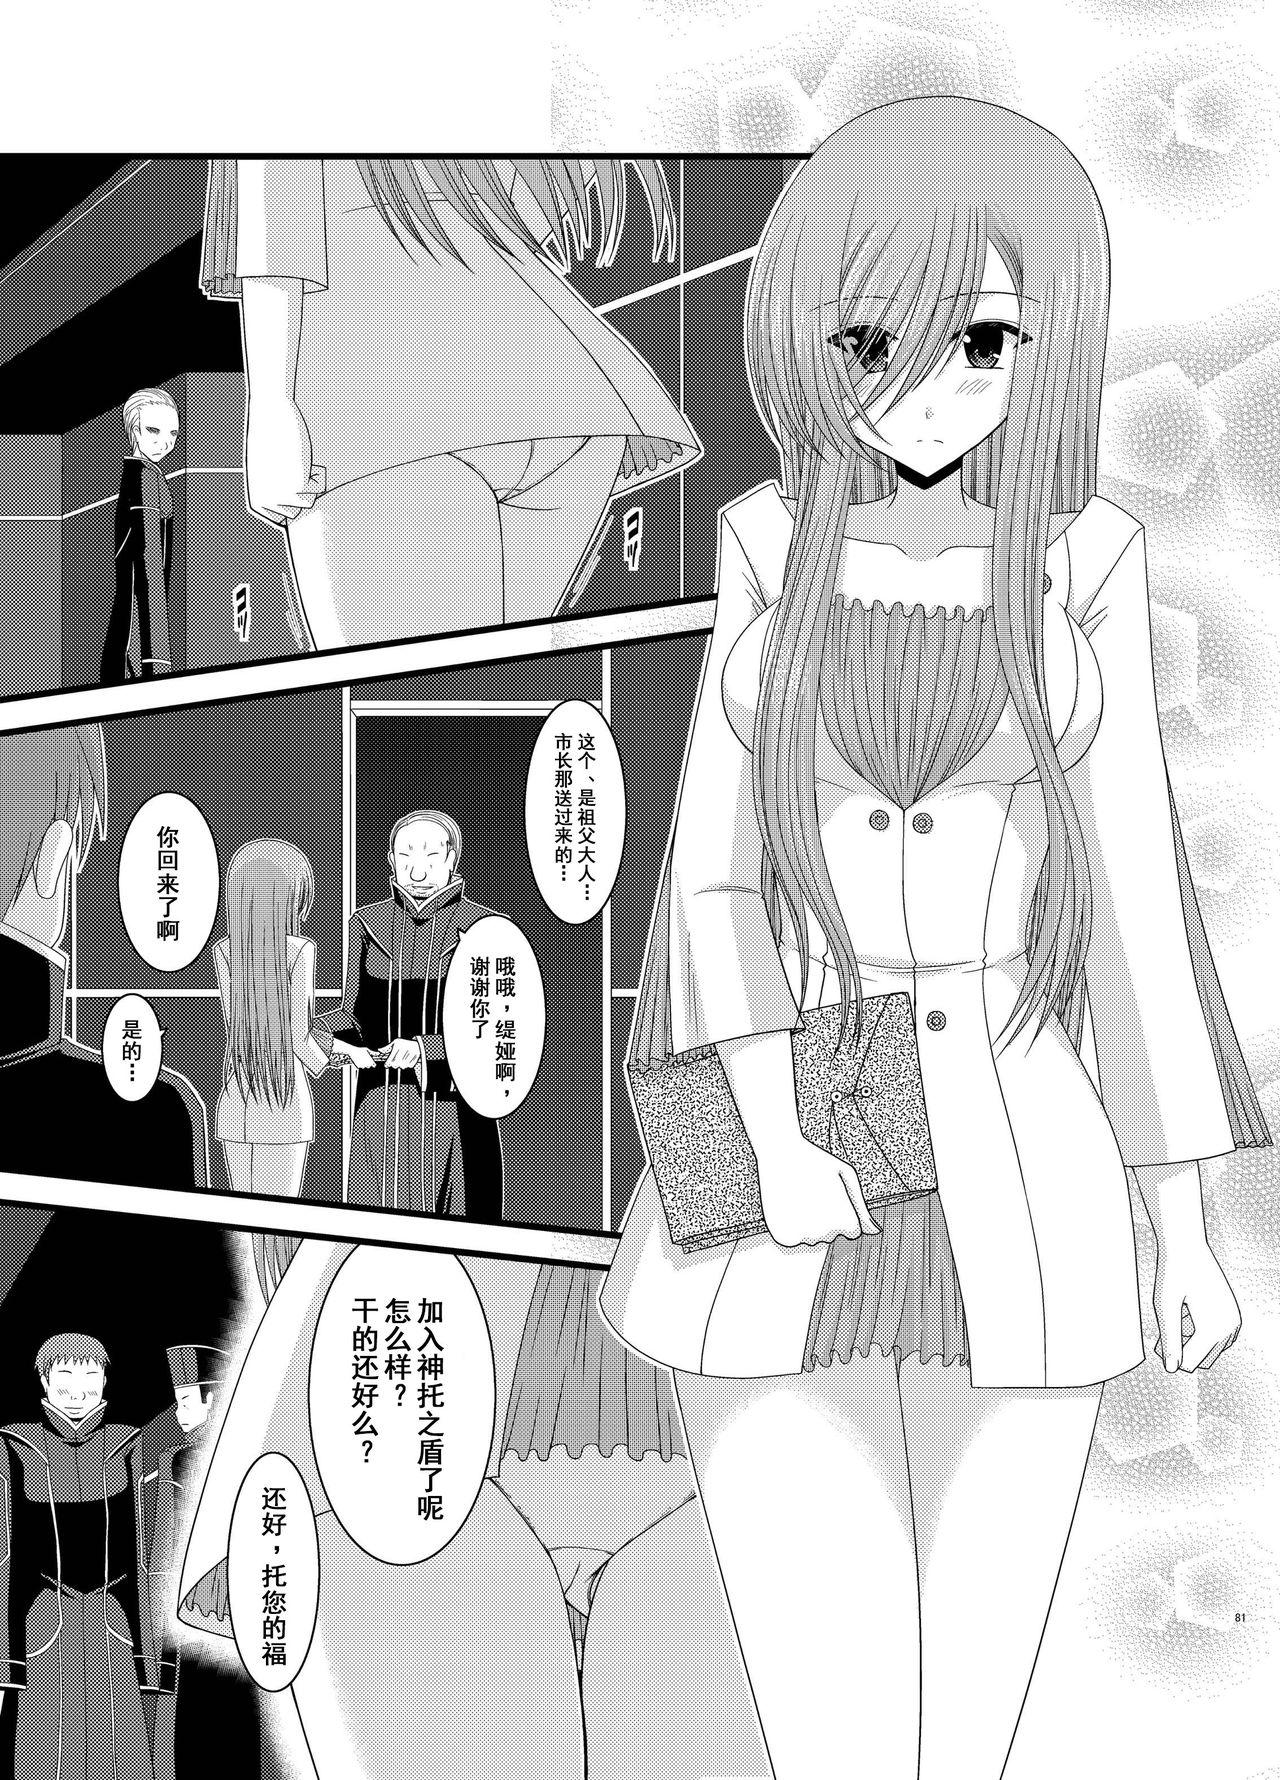 Prostitute Melon ga Chou Shindou! R6 - Tales of the abyss Teasing - Page 4